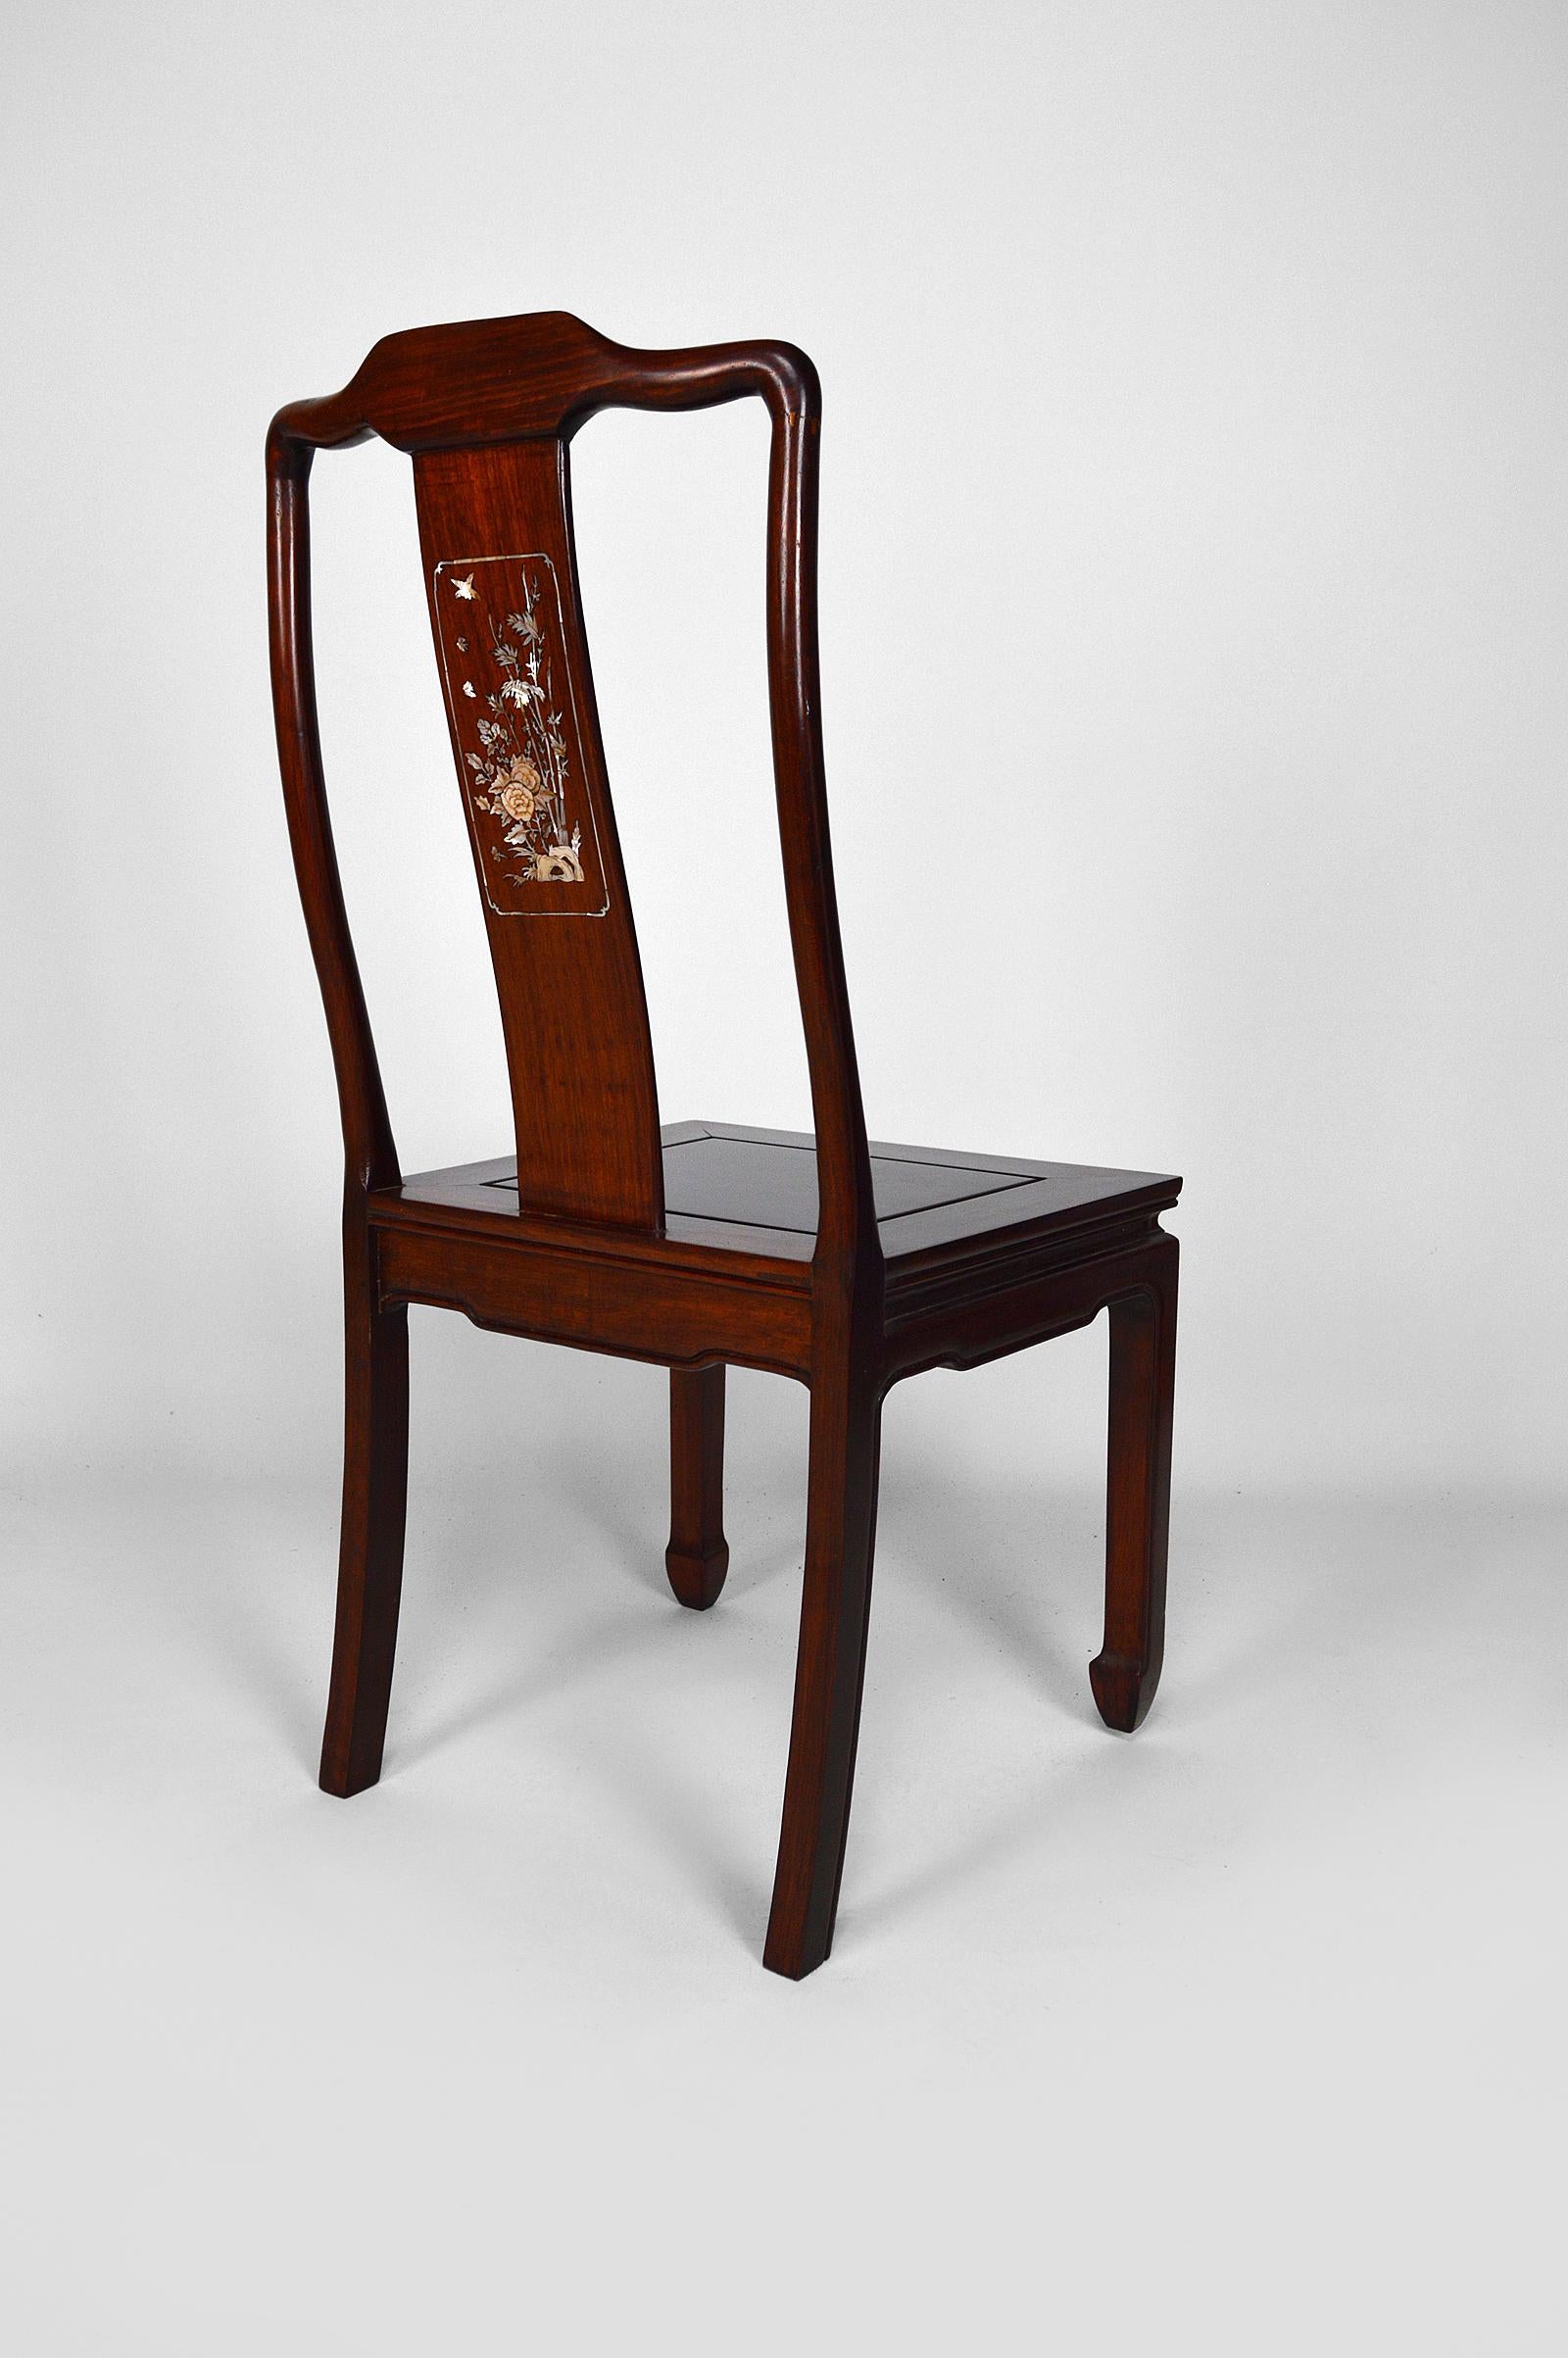 Set of 5 Asian Inlaid Wooden Chairs, Mid-20th Century 2